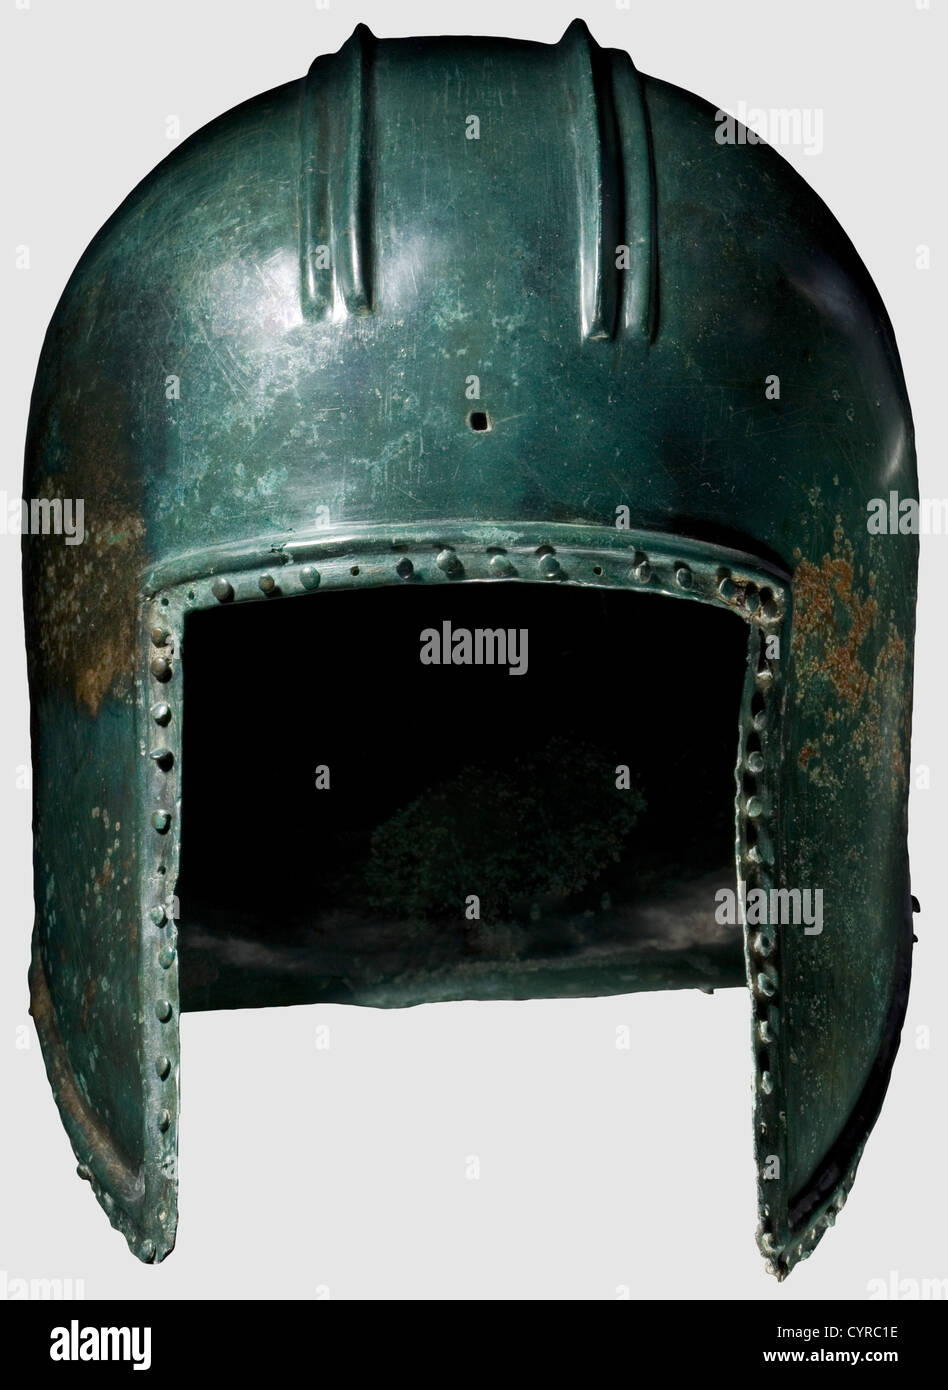 An Illyrian type helmet,6th century B.C.Bronze with fine green noble patina.Of domed form,the crown with two raised parallel ridges extending from front to back forming a crest base.A rectangular hole pierced at centre front for crest attachment.Rectangular face opening,the pointed cheekpieces with pierced holes for the chinstrap.Slightly flaring neck-guard.The edge bordered by a moulded rib and a row of pierced holes for lining attachment with partially preserved rivets.Small corrosion pits in some places,slightly torn at rear.Height 22 cm.Good me,Additional-Rights-Clearences-Not Available Stock Photo